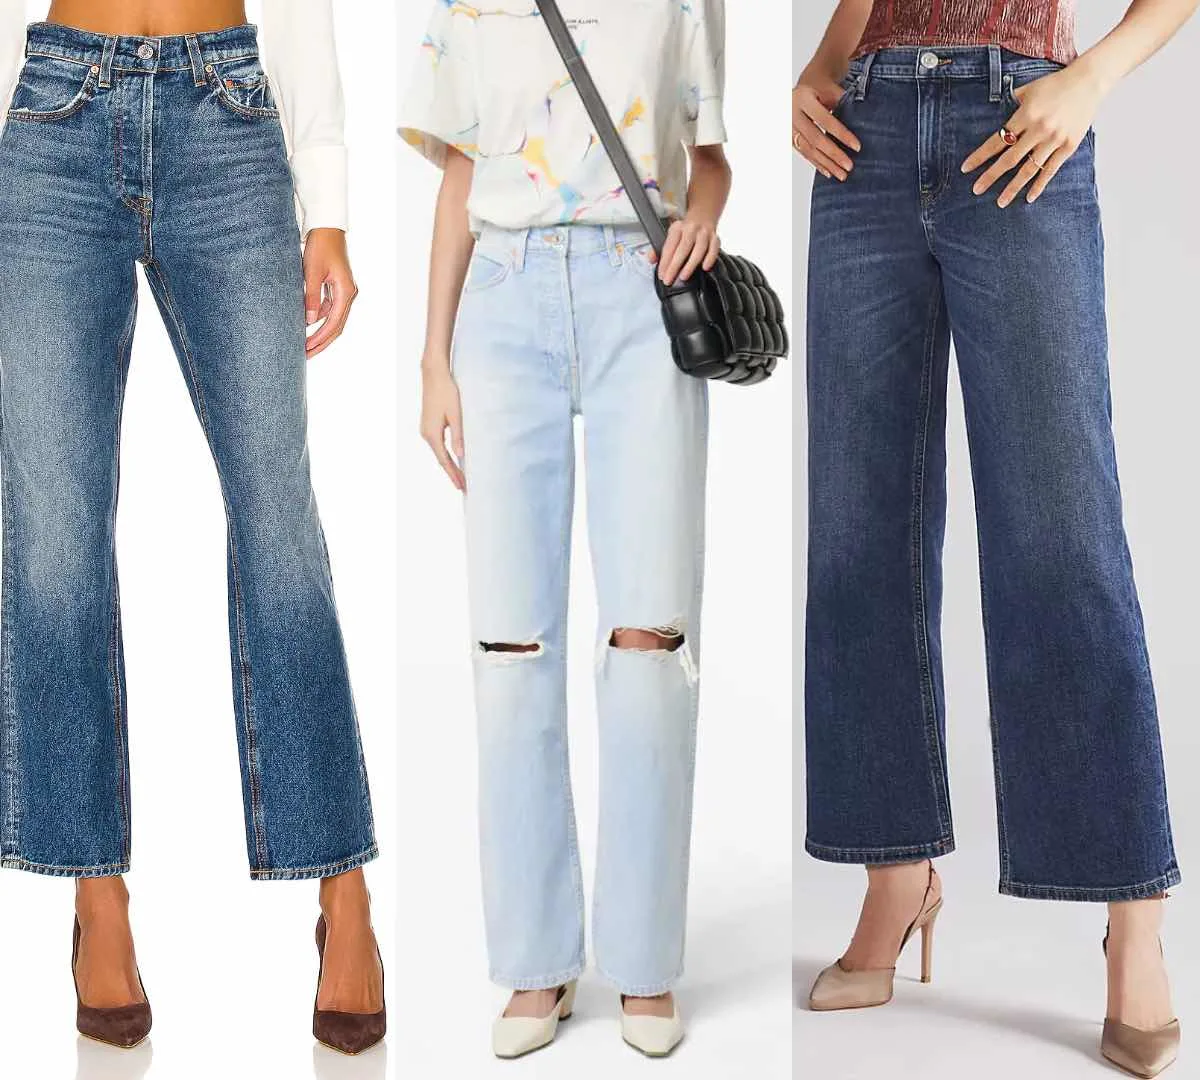 3 women wearing different pumps with wide leg jeans.